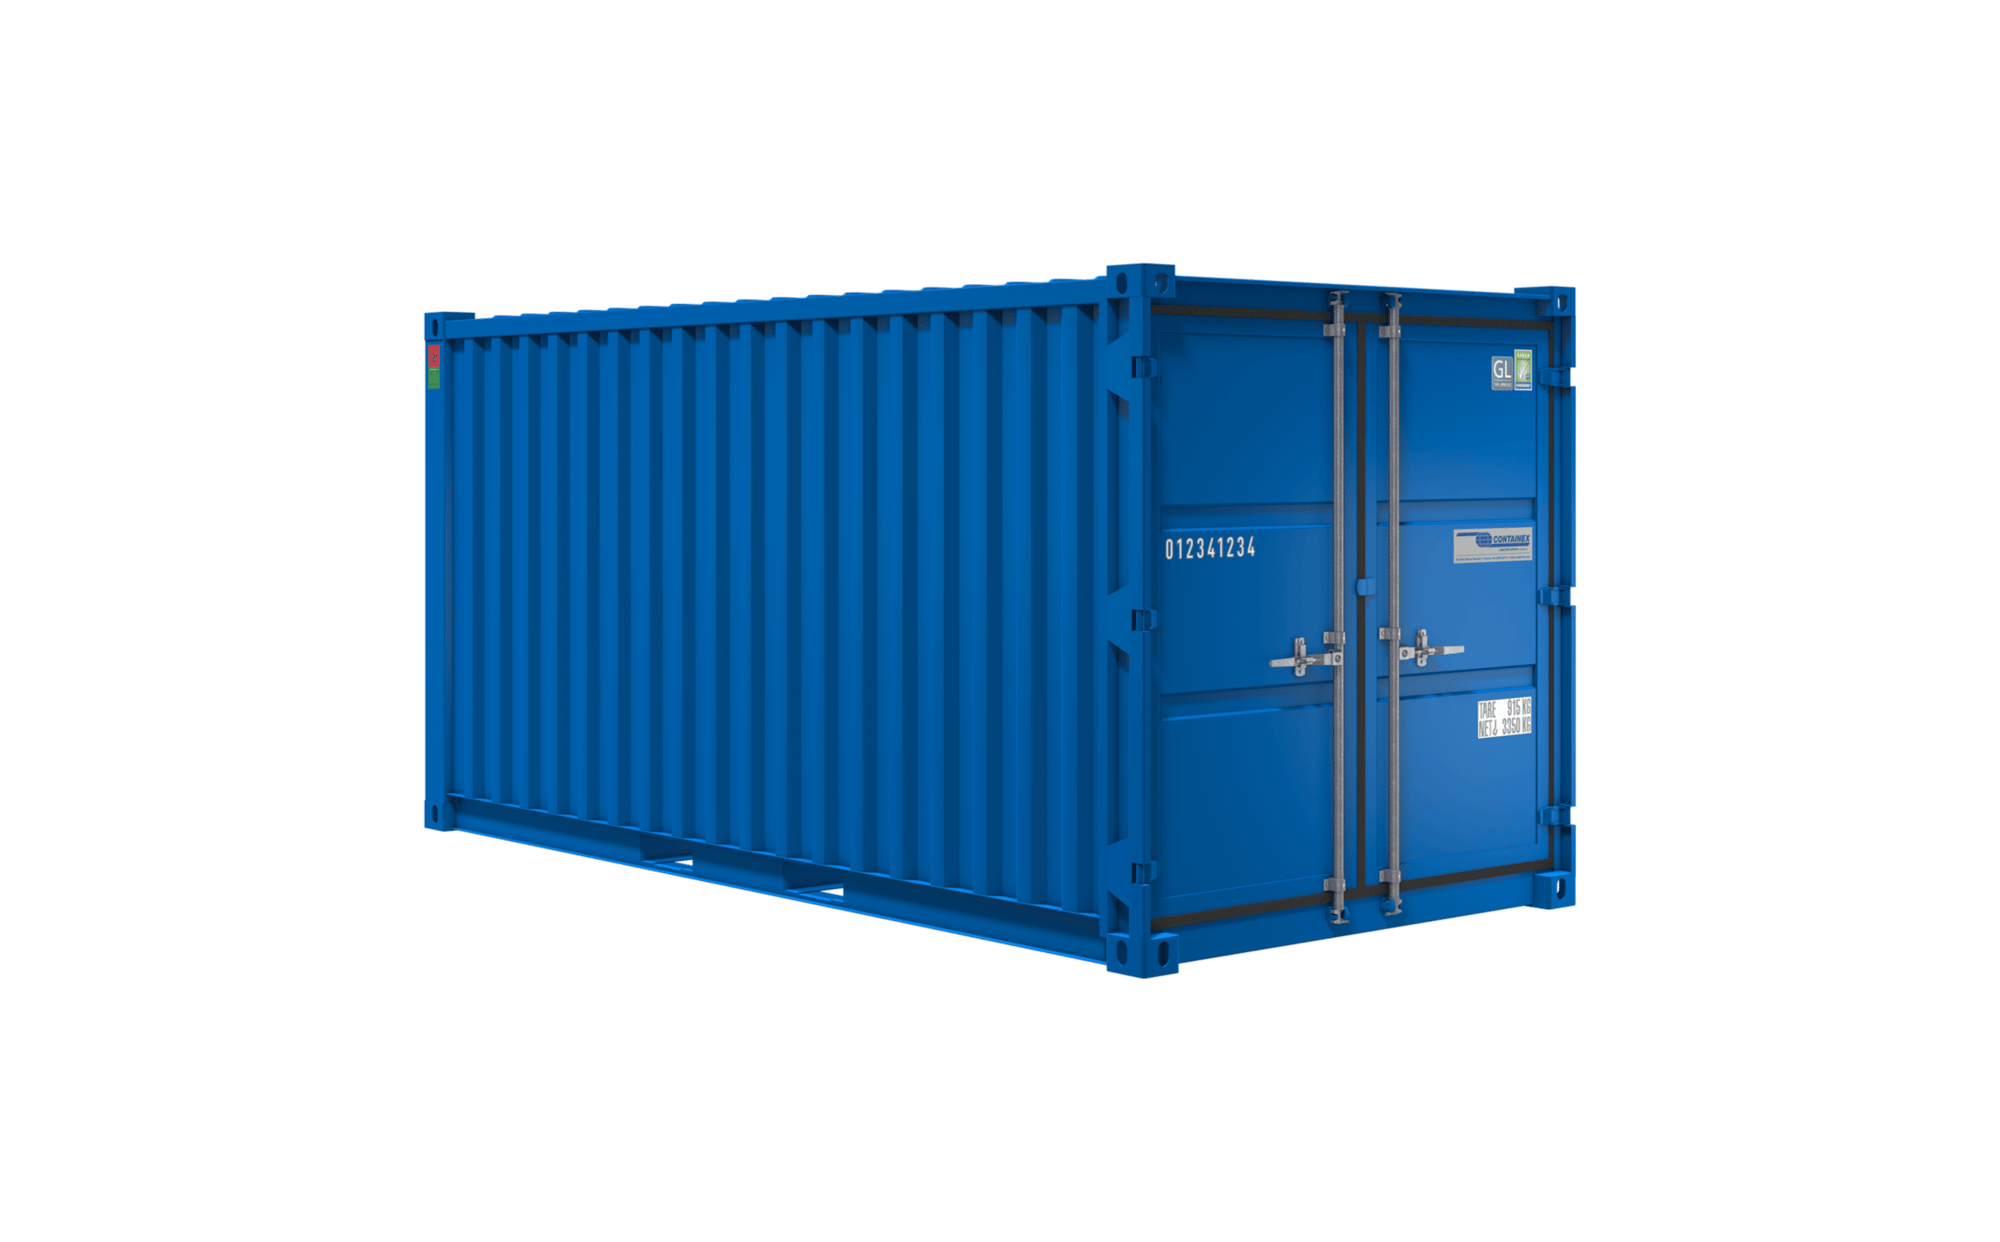 Lagercontainer 15'